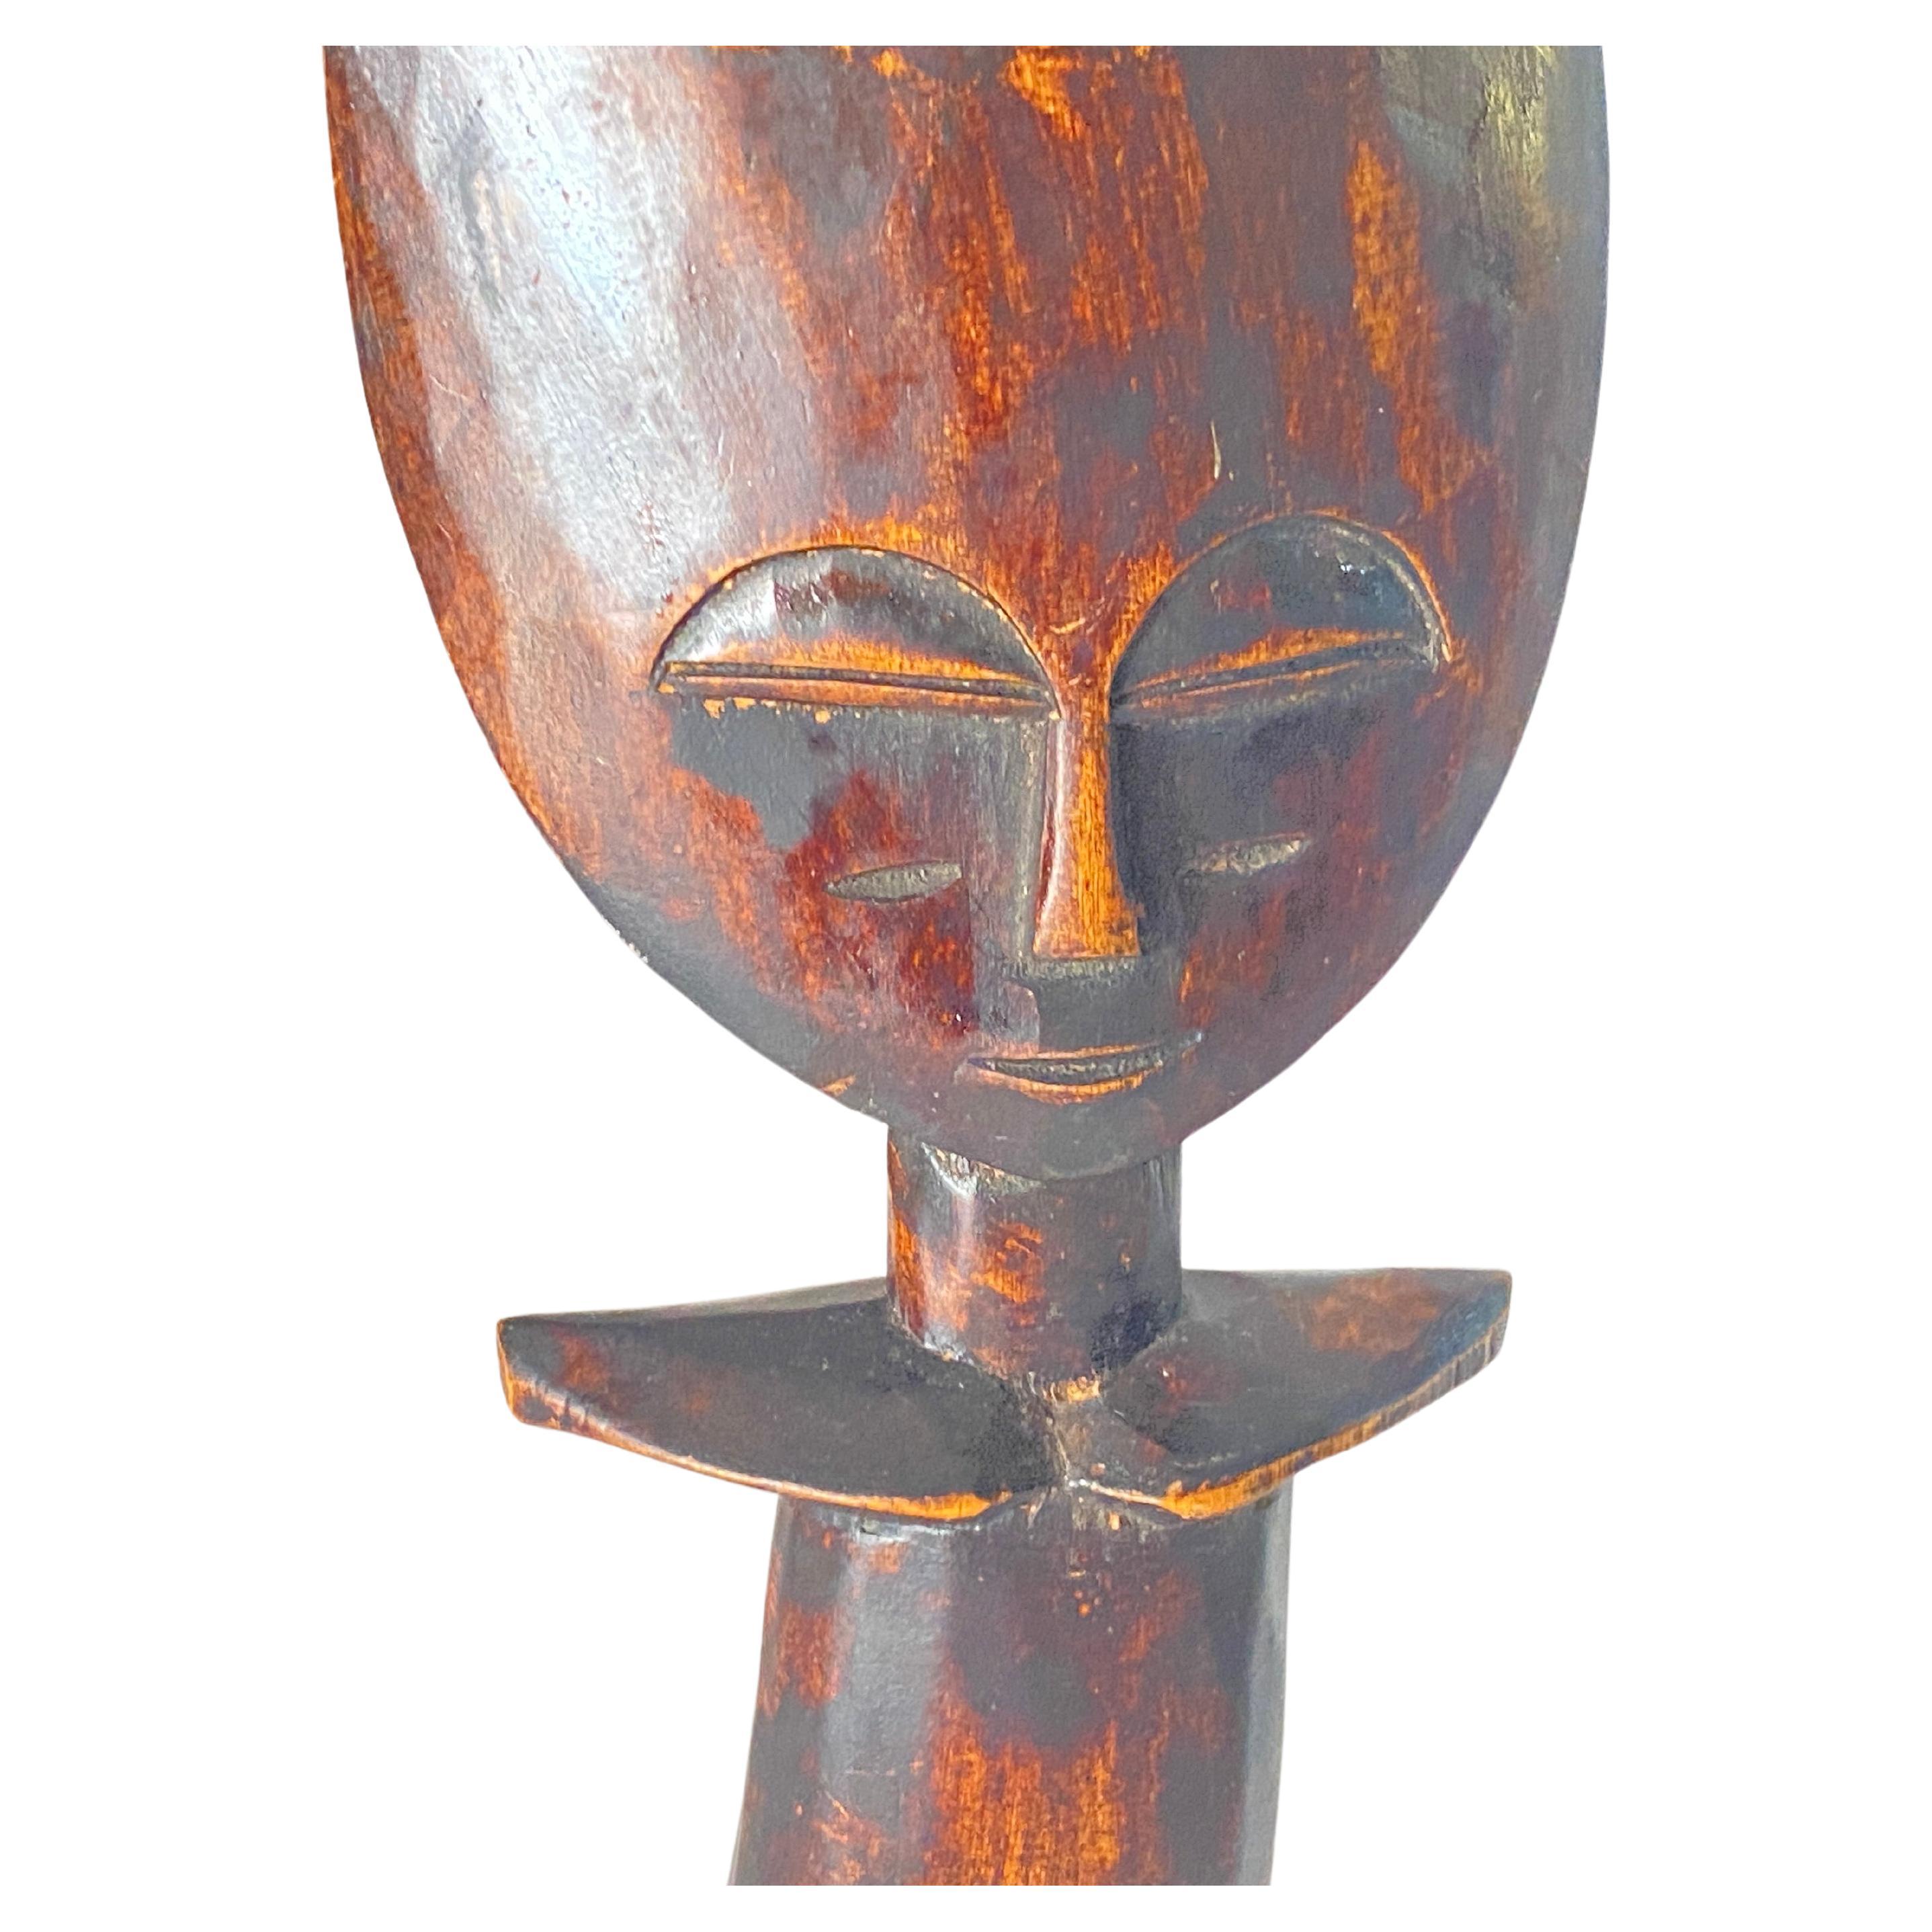 African pair of sculpture in wood handmade carved. Beautiful Patina.